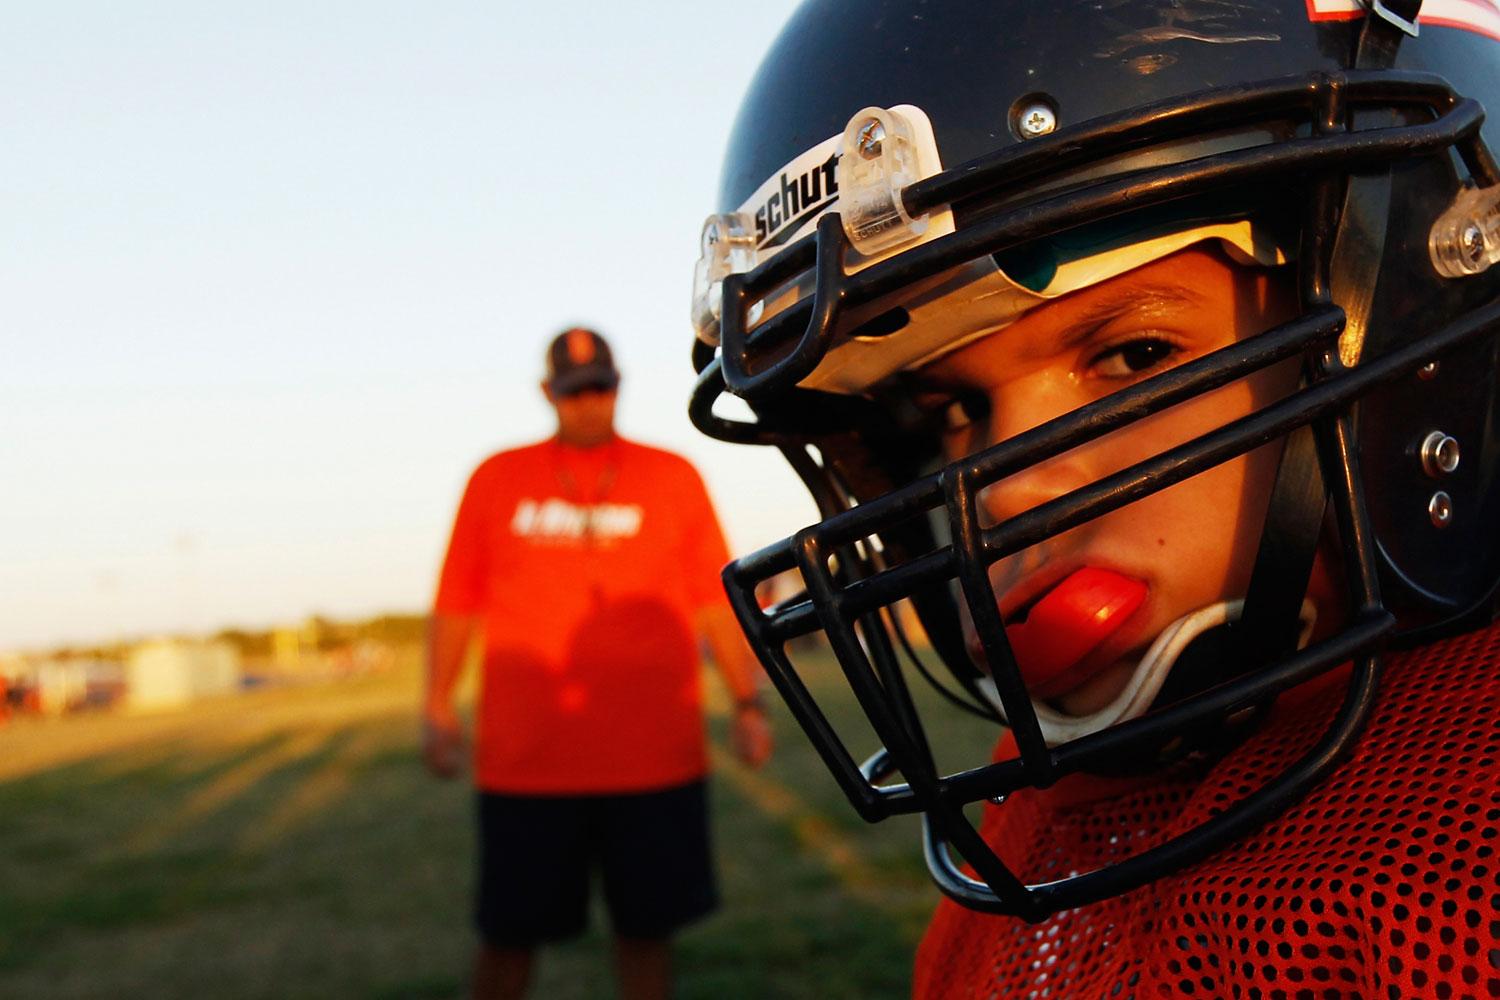 A youngster chews on his mouthguard during the filming of the television docu-series "Friday Night Tykes" in San Antonio, Texas. (Walter Iooss&mdash;Esquire Network/Reuters)